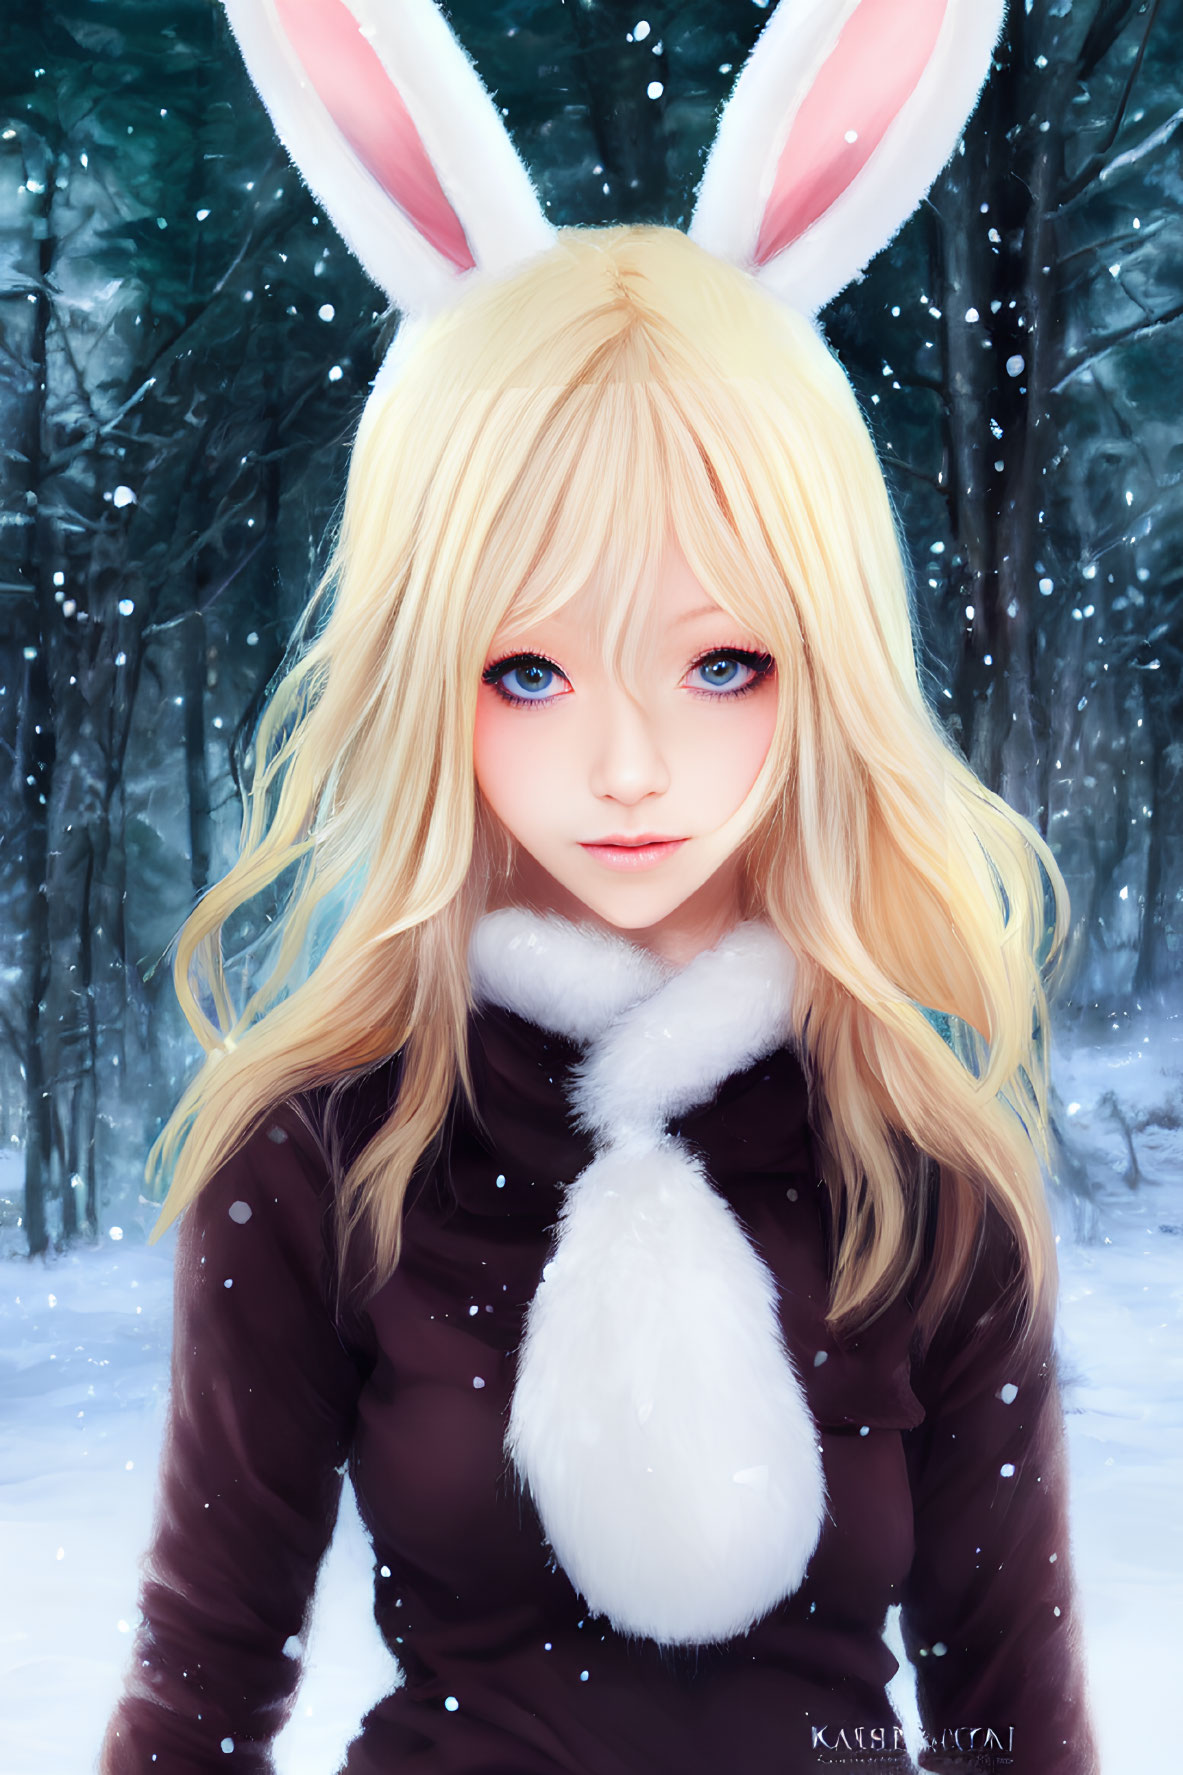 Digital artwork: Person with bunny ears in snowy forest, long blonde hair, blue eyes, fluffy white